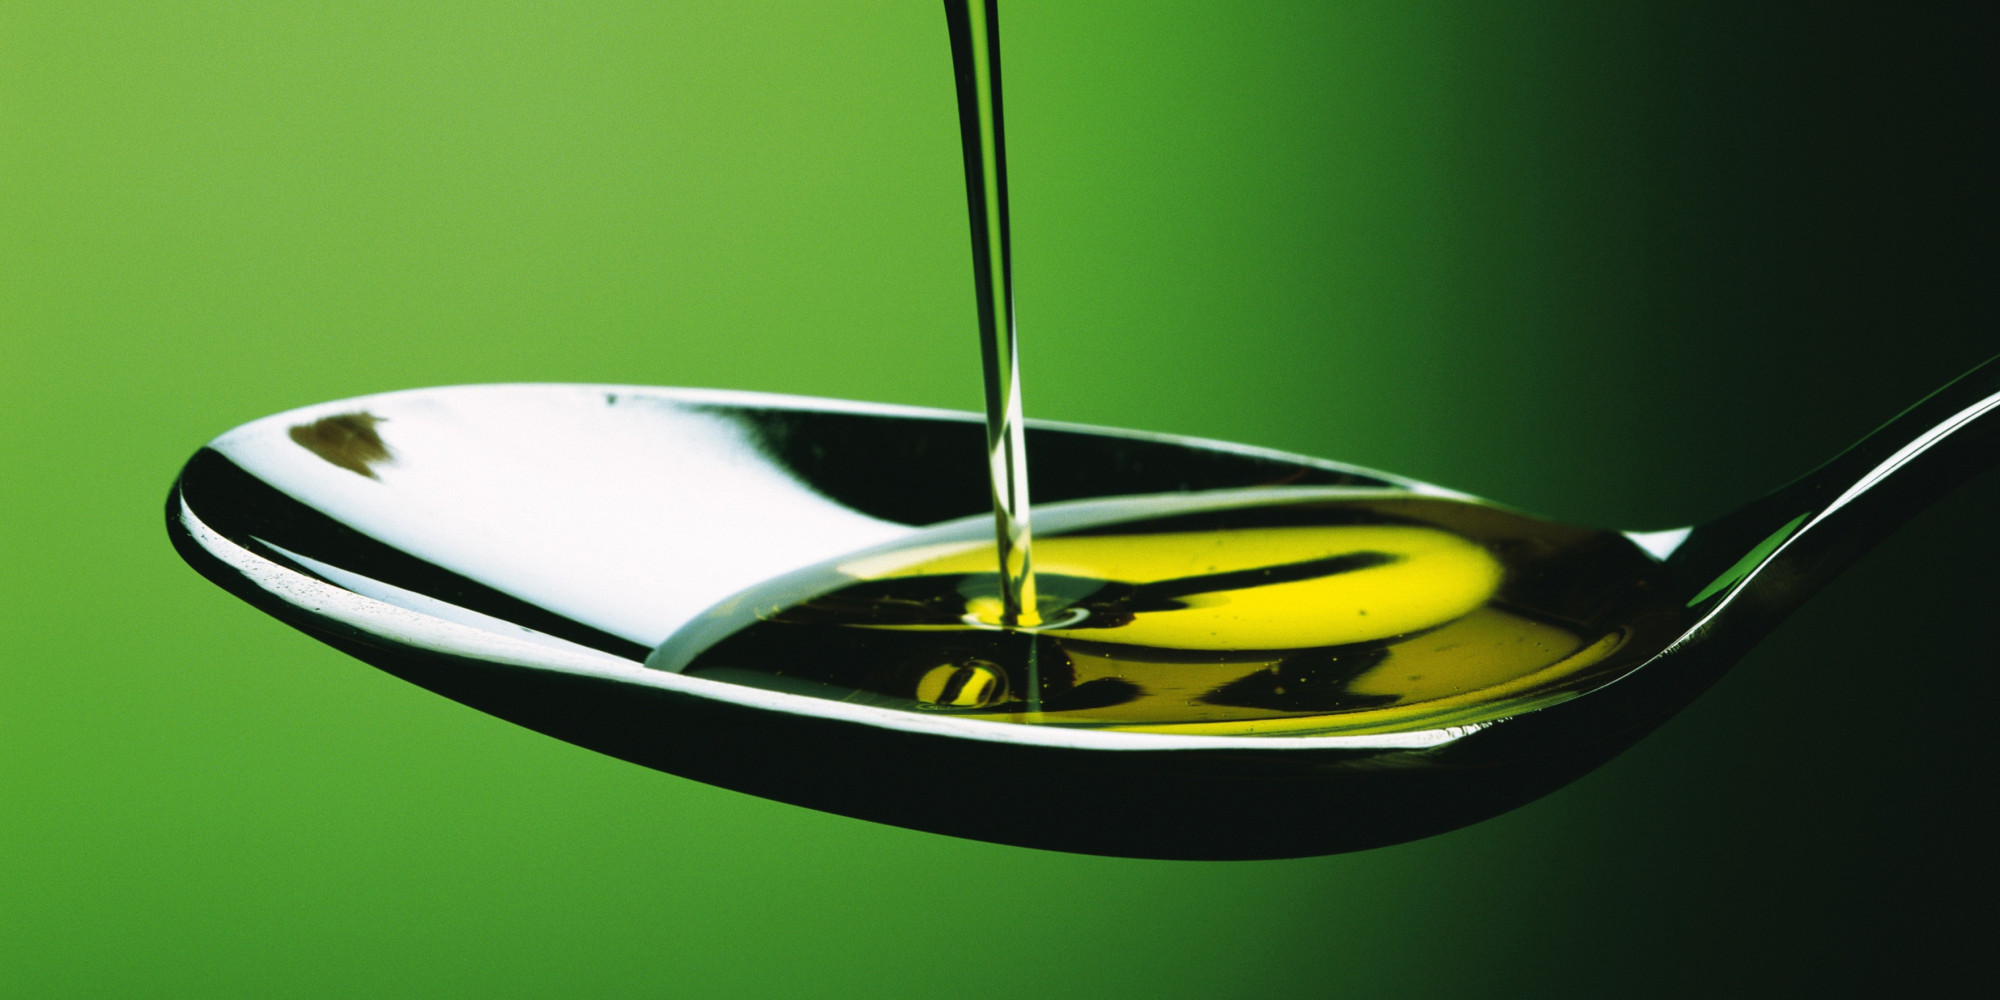 Oil That is Poured into a Spoon, Close Up, Front View